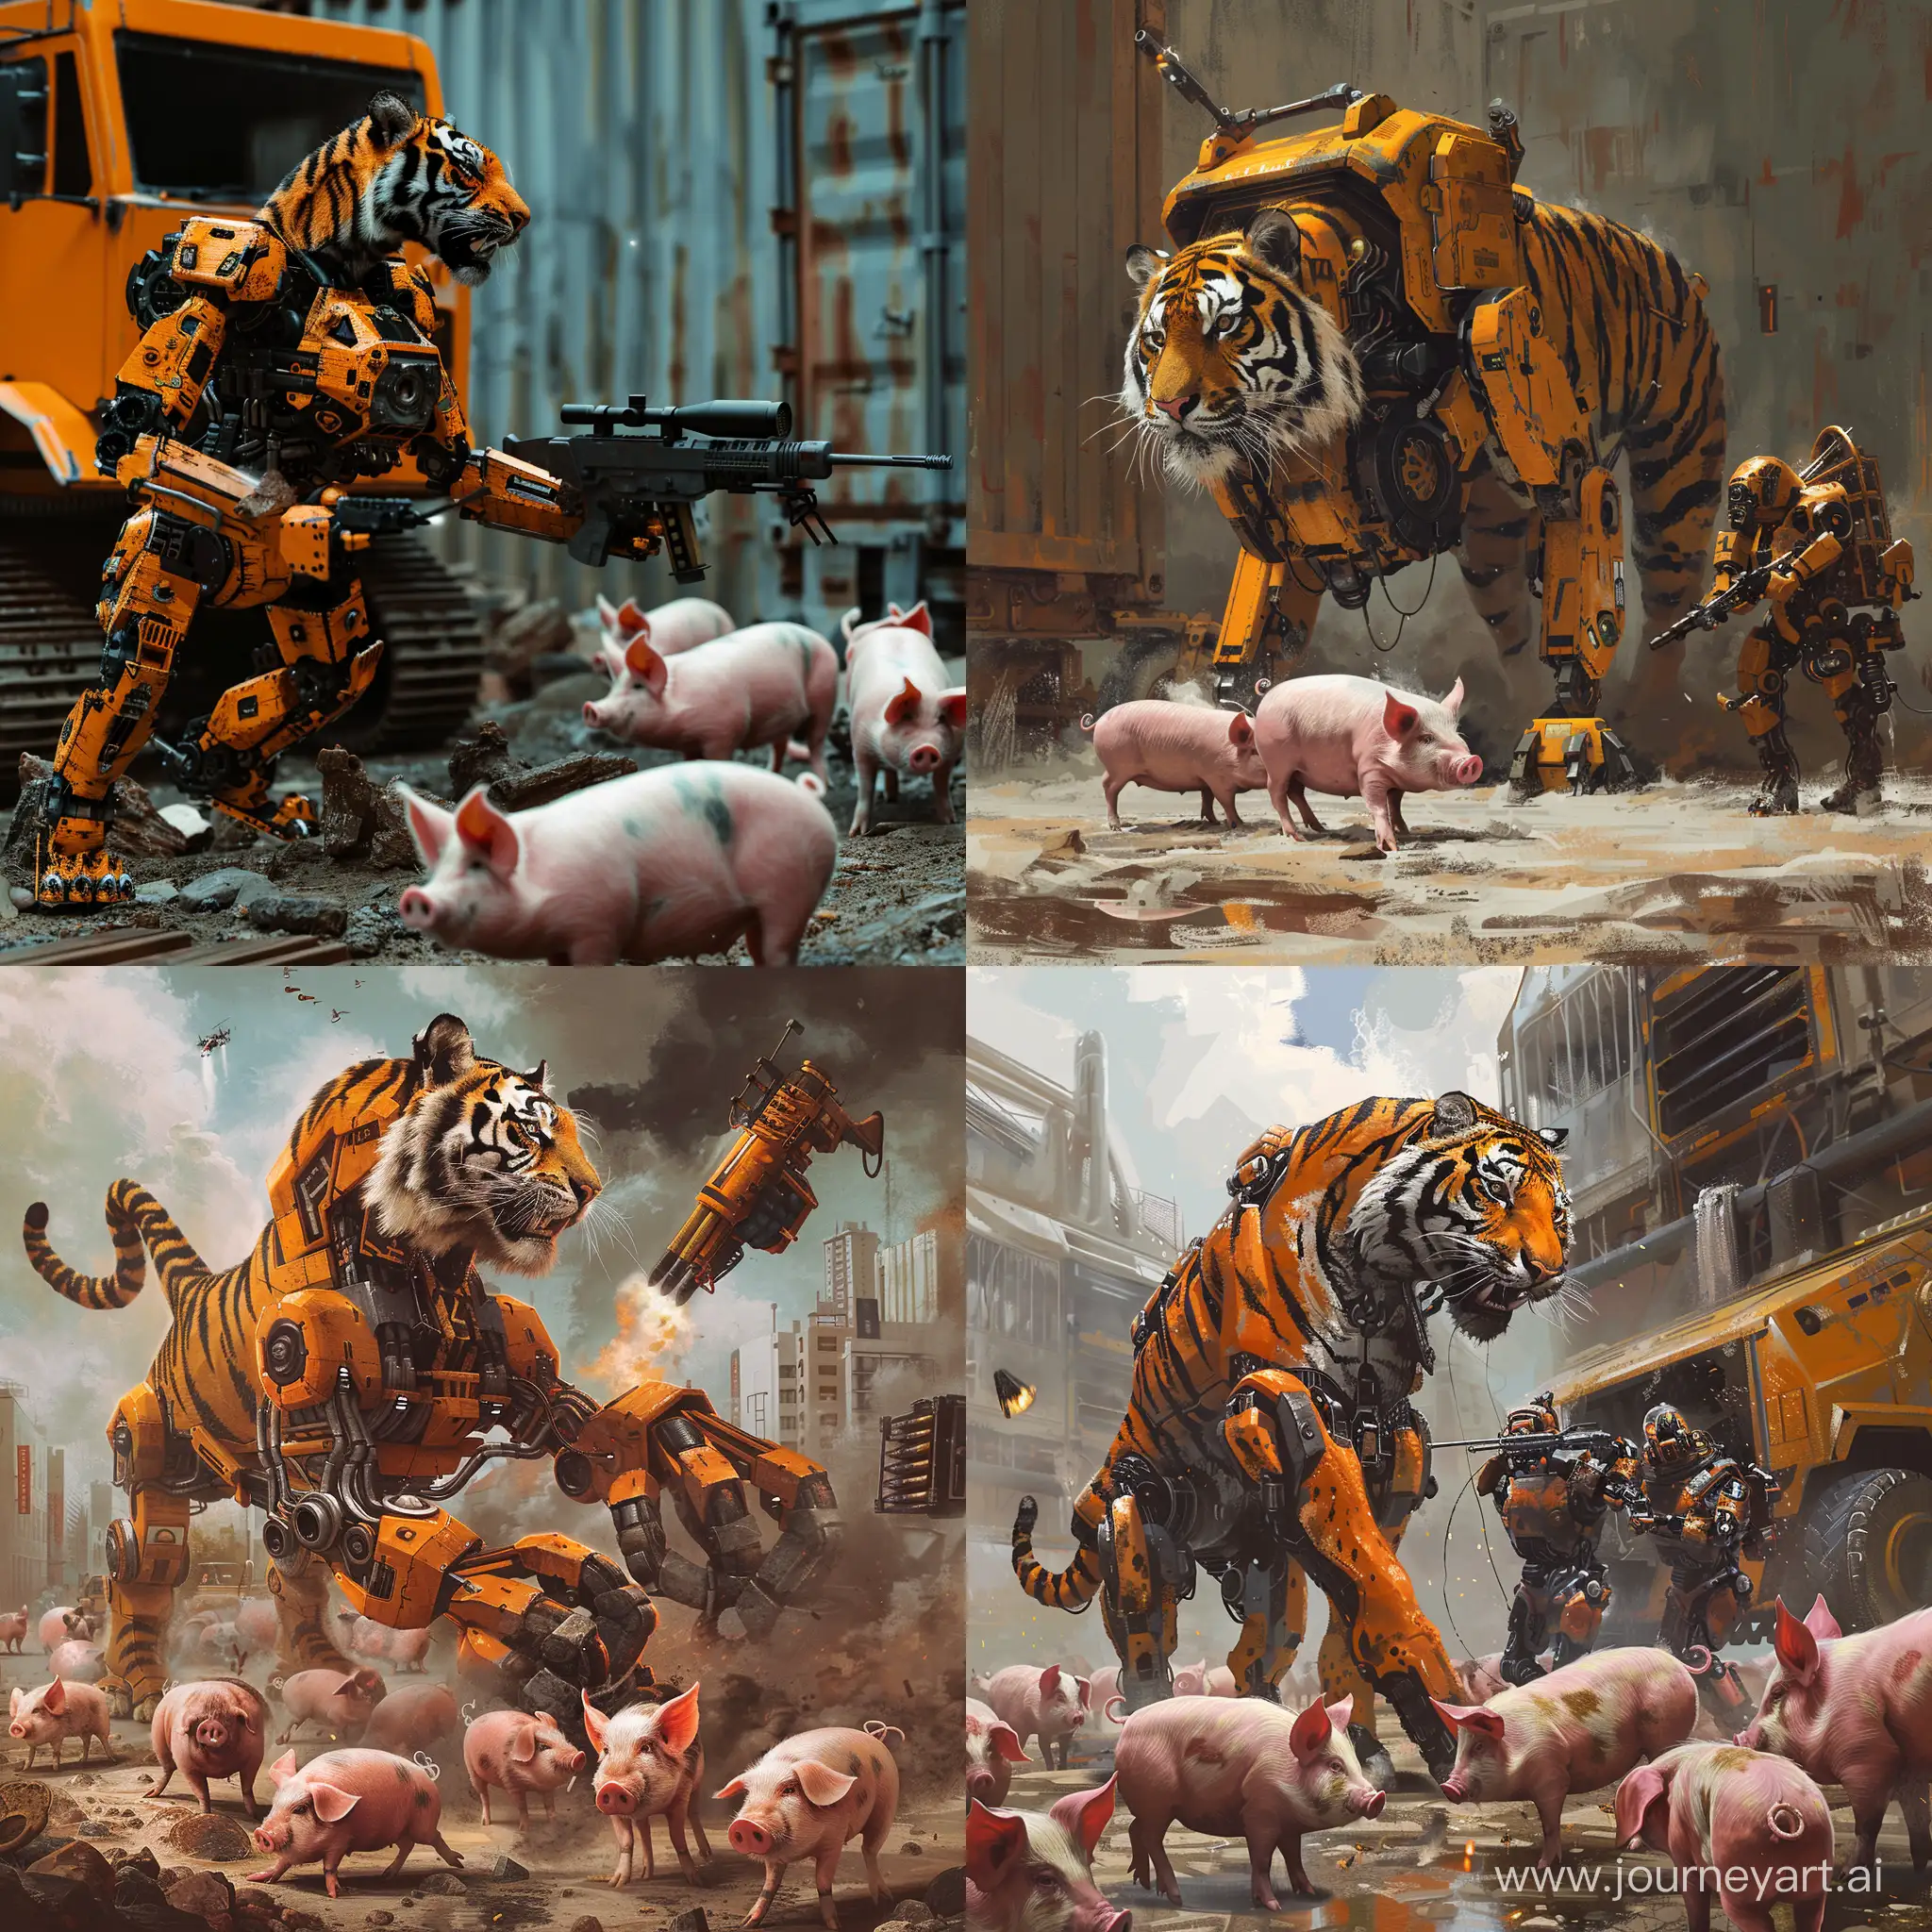 Fierce-Tiger-Bot-Conquers-Kiev-Engaging-in-Intense-Battle-with-Pigs